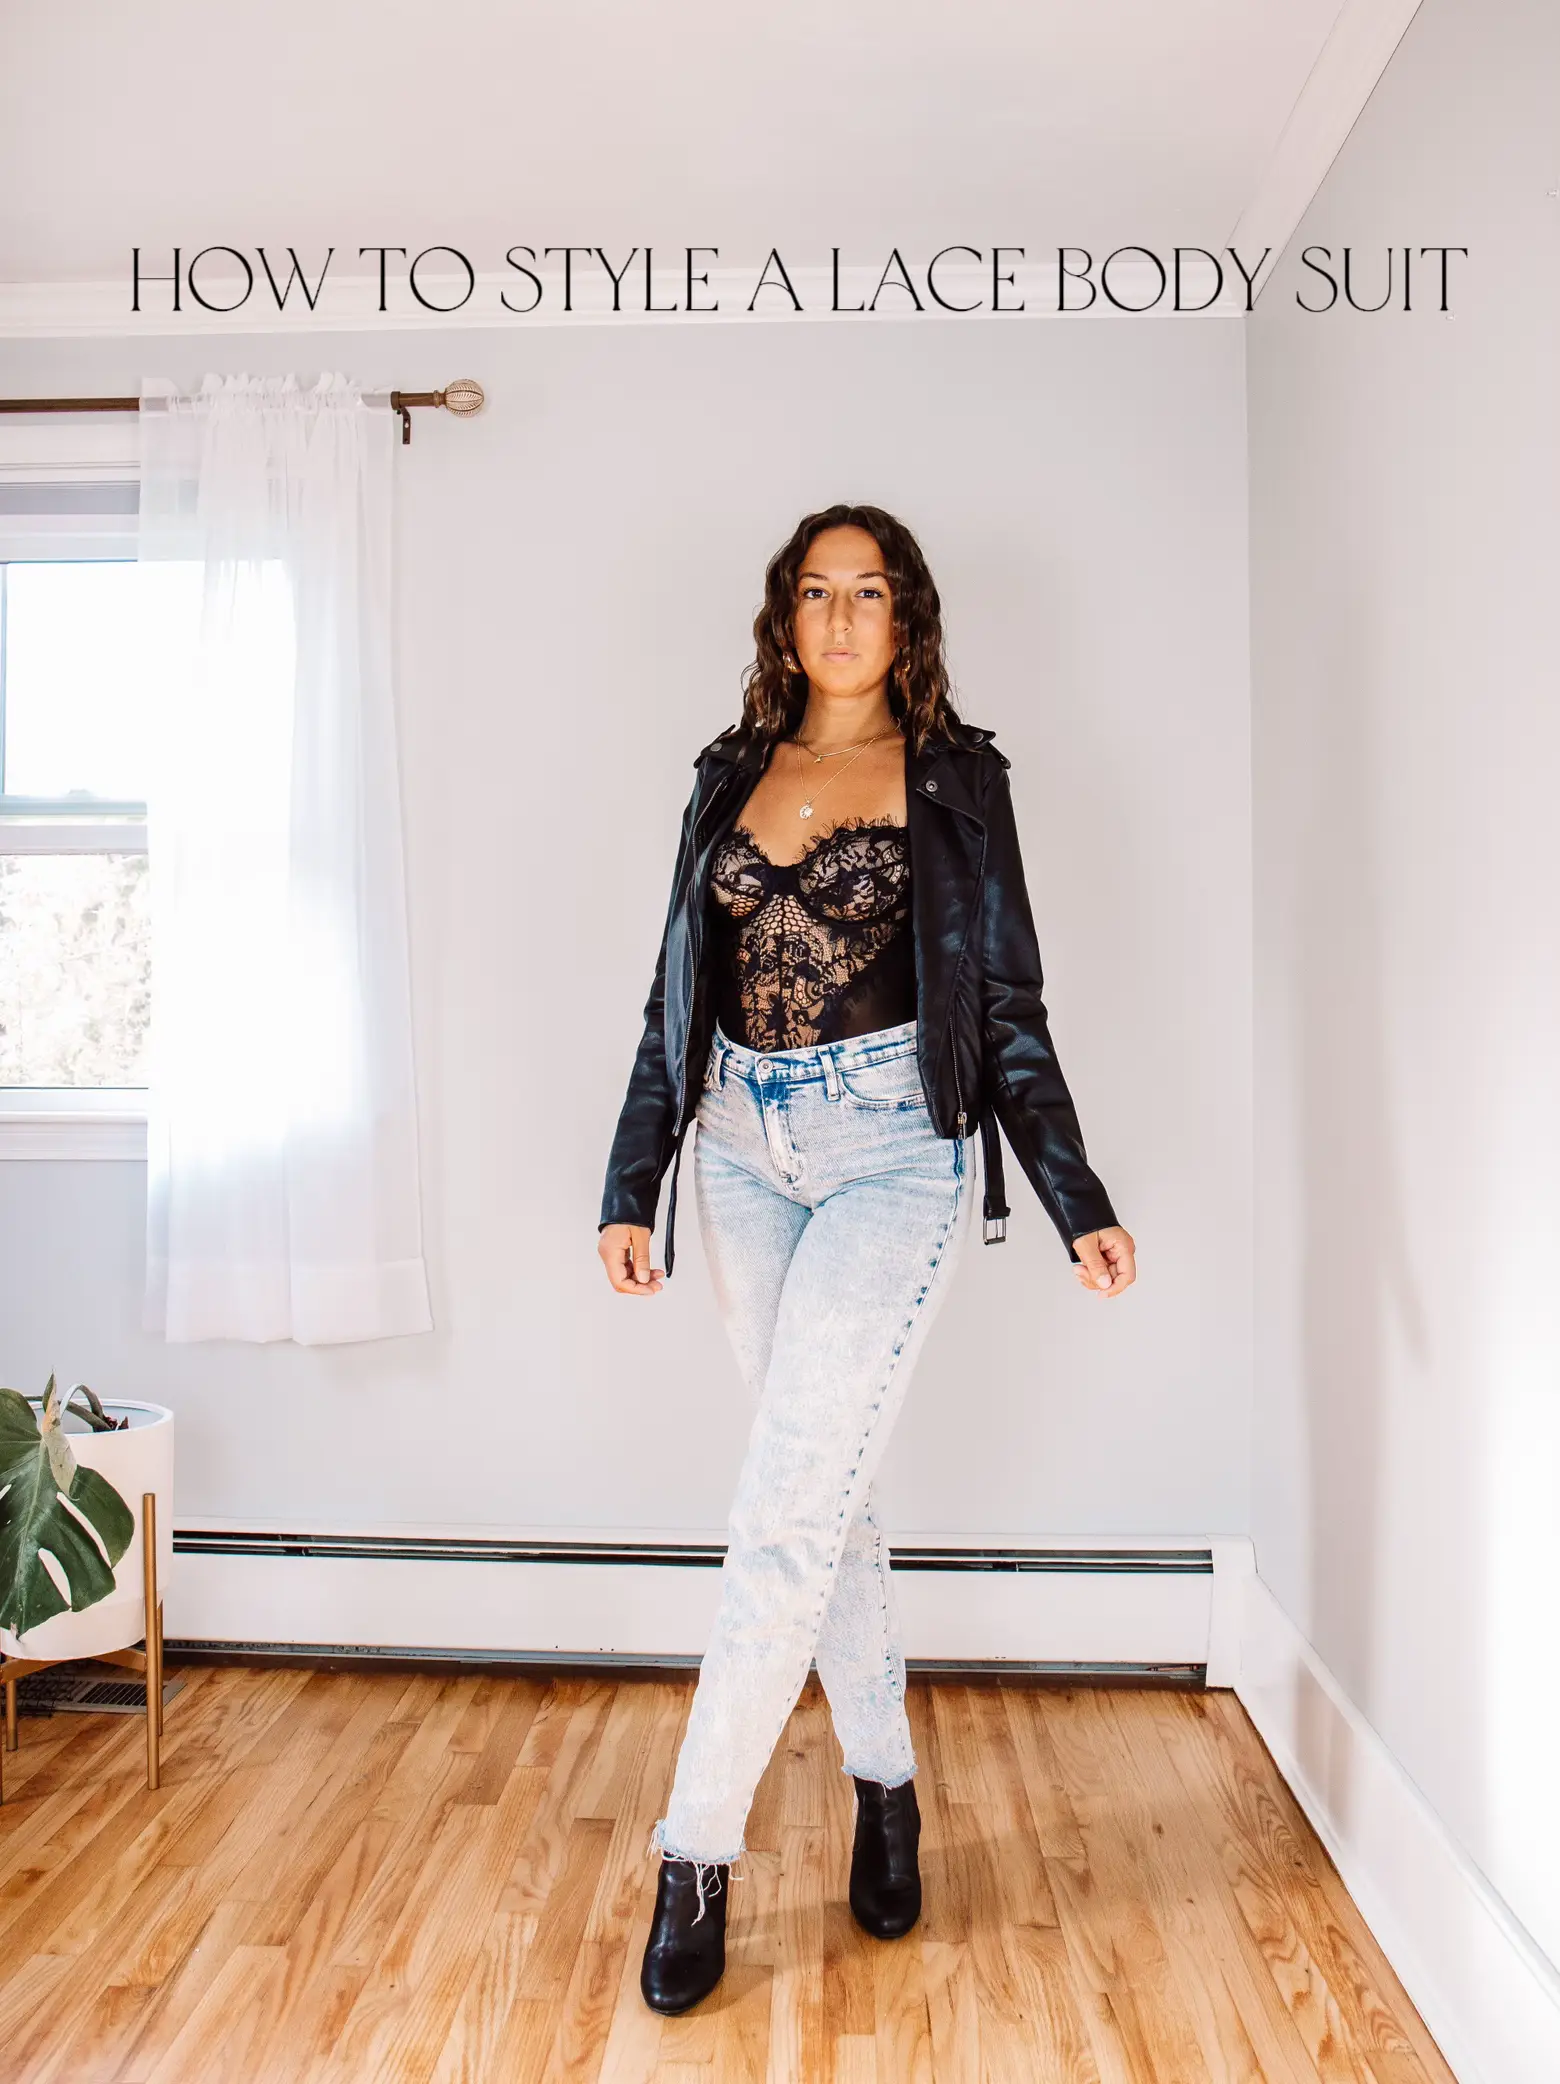 How to style a lace body suit, Gallery posted by Pamela_rae_